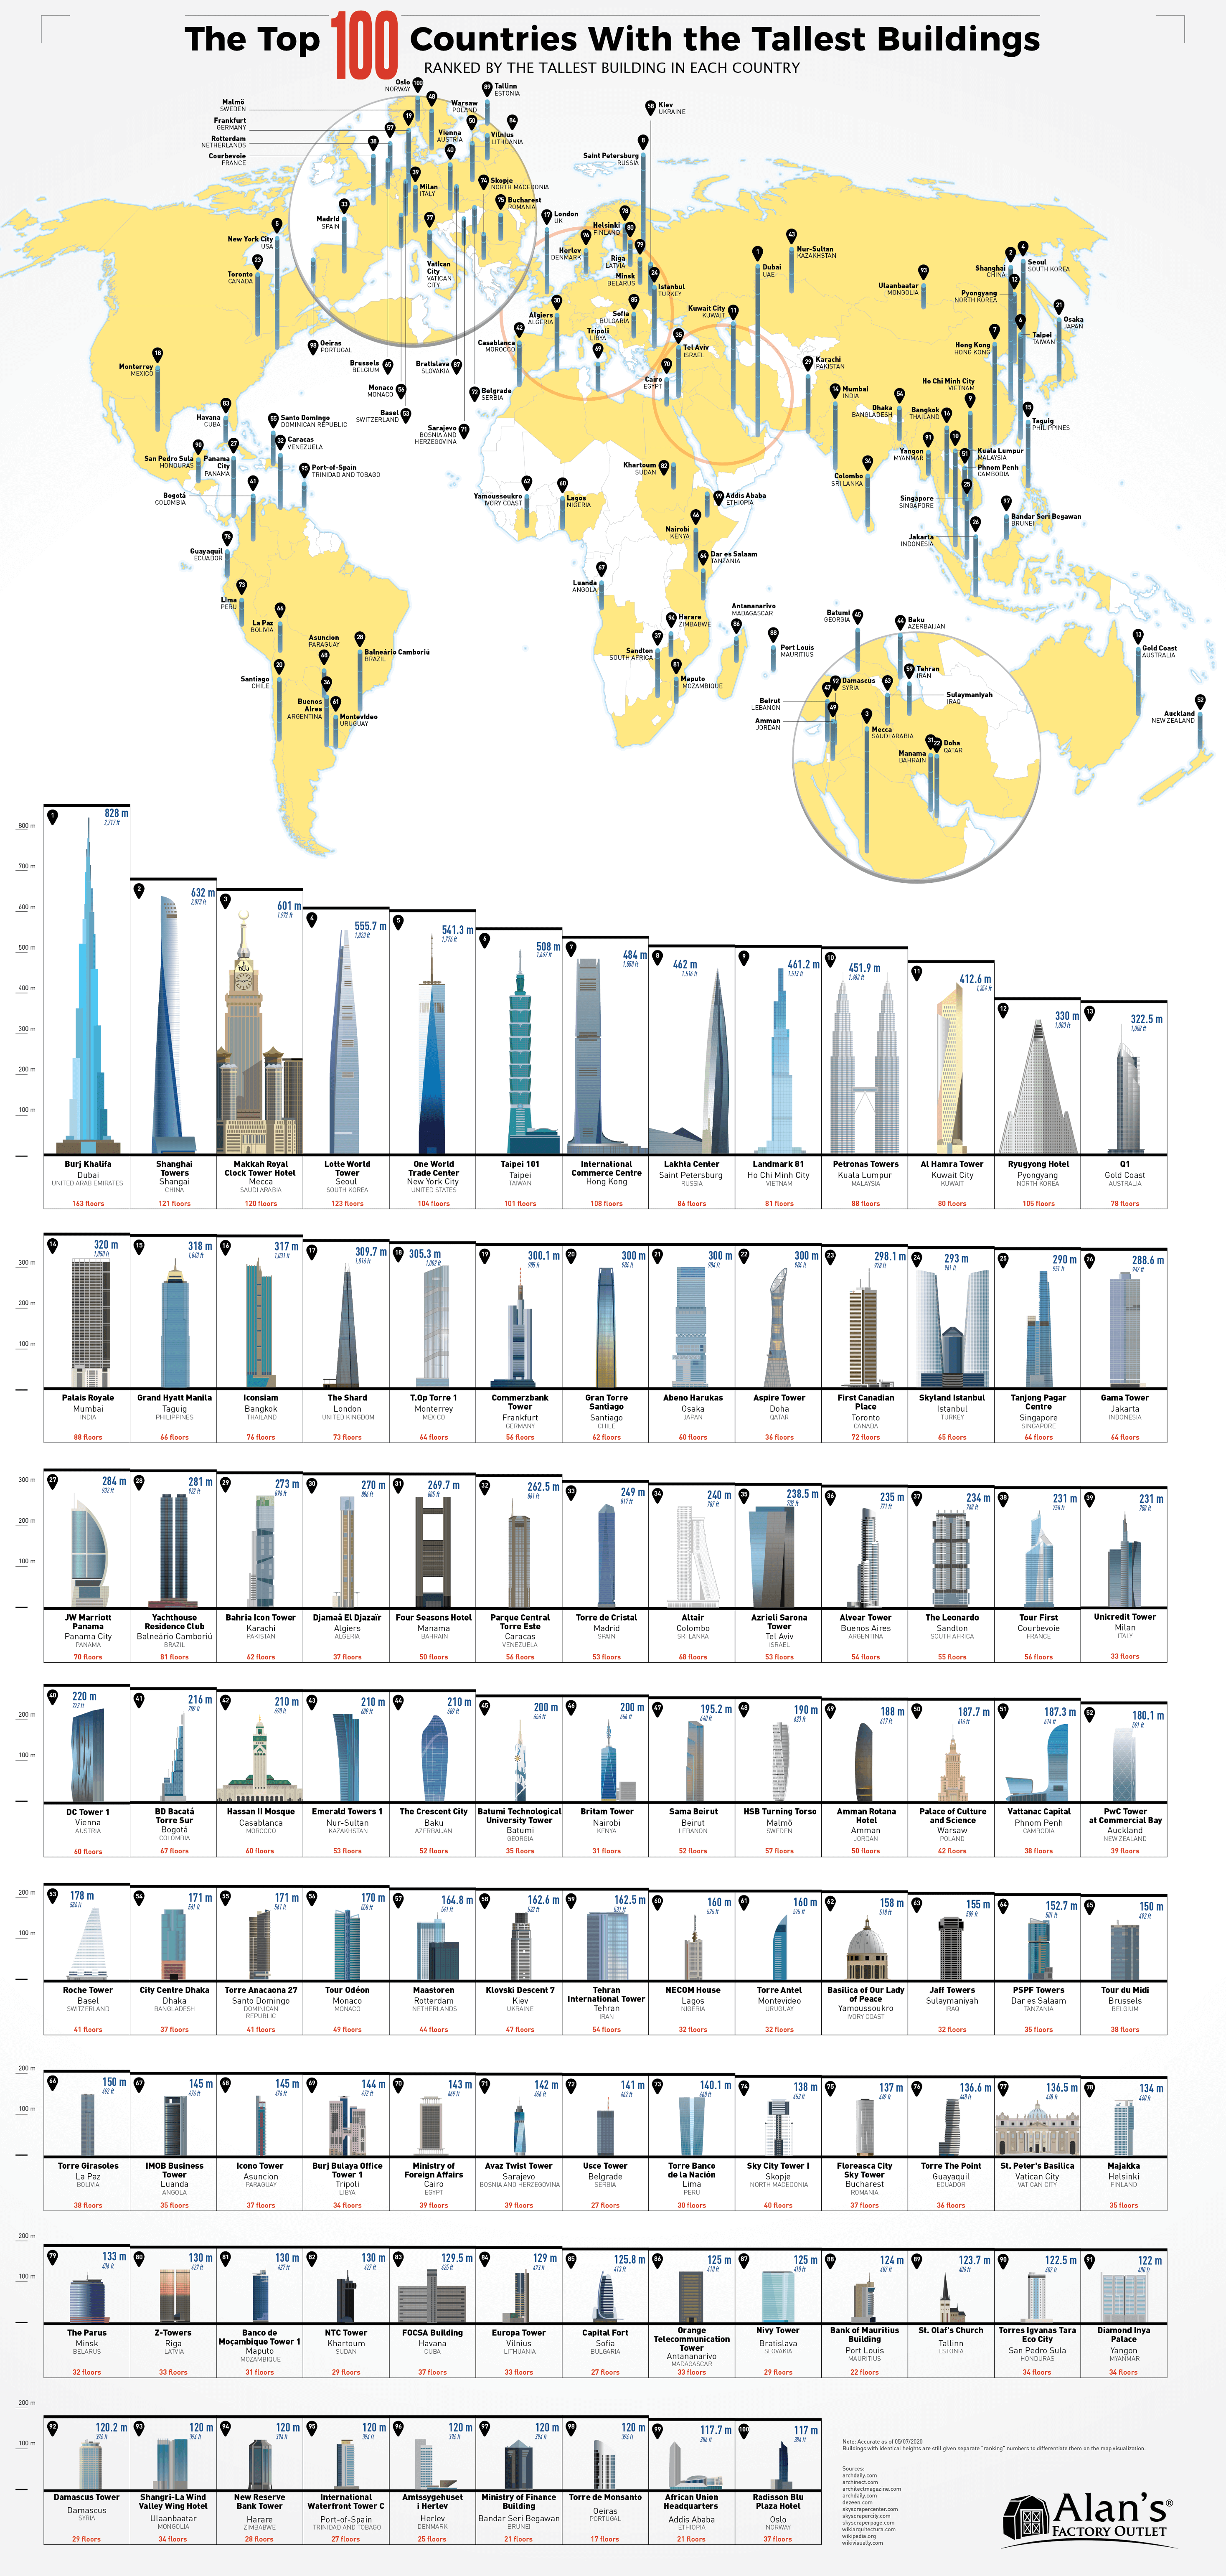 The Top 100 Countries With the Tallest Buildings